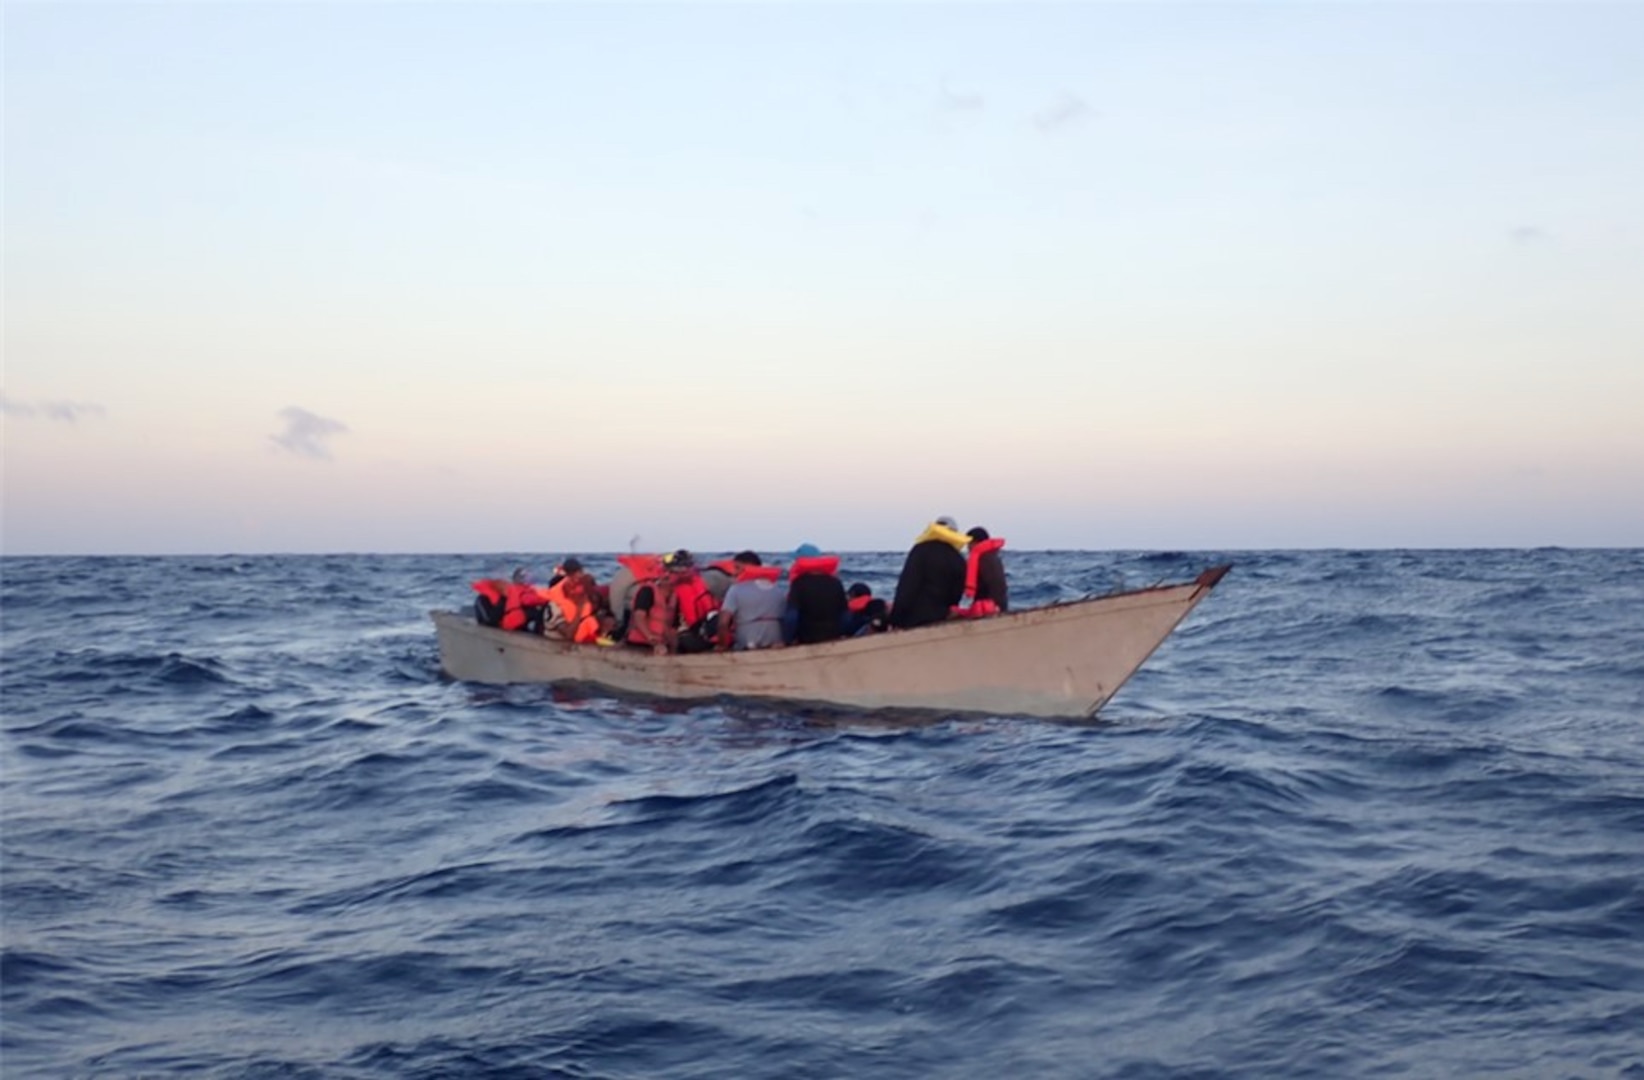 Coast Guard Cutter Confidence interdicts a migrant voyage in the Mona Passage Aug. 28, 2023.  Following the interdiction, the Coast Guard crew embarked 42 migrants who claimed to be Dominican Republic nationals.  The Coast Guard Cutter Heriberto Hernandez repatriated the 42 migrants, alongside 17 others from a separate interdiction to a Dominican Republic Navy vessel Aug. 31, 2023. (U.S. Coast Guard photo)